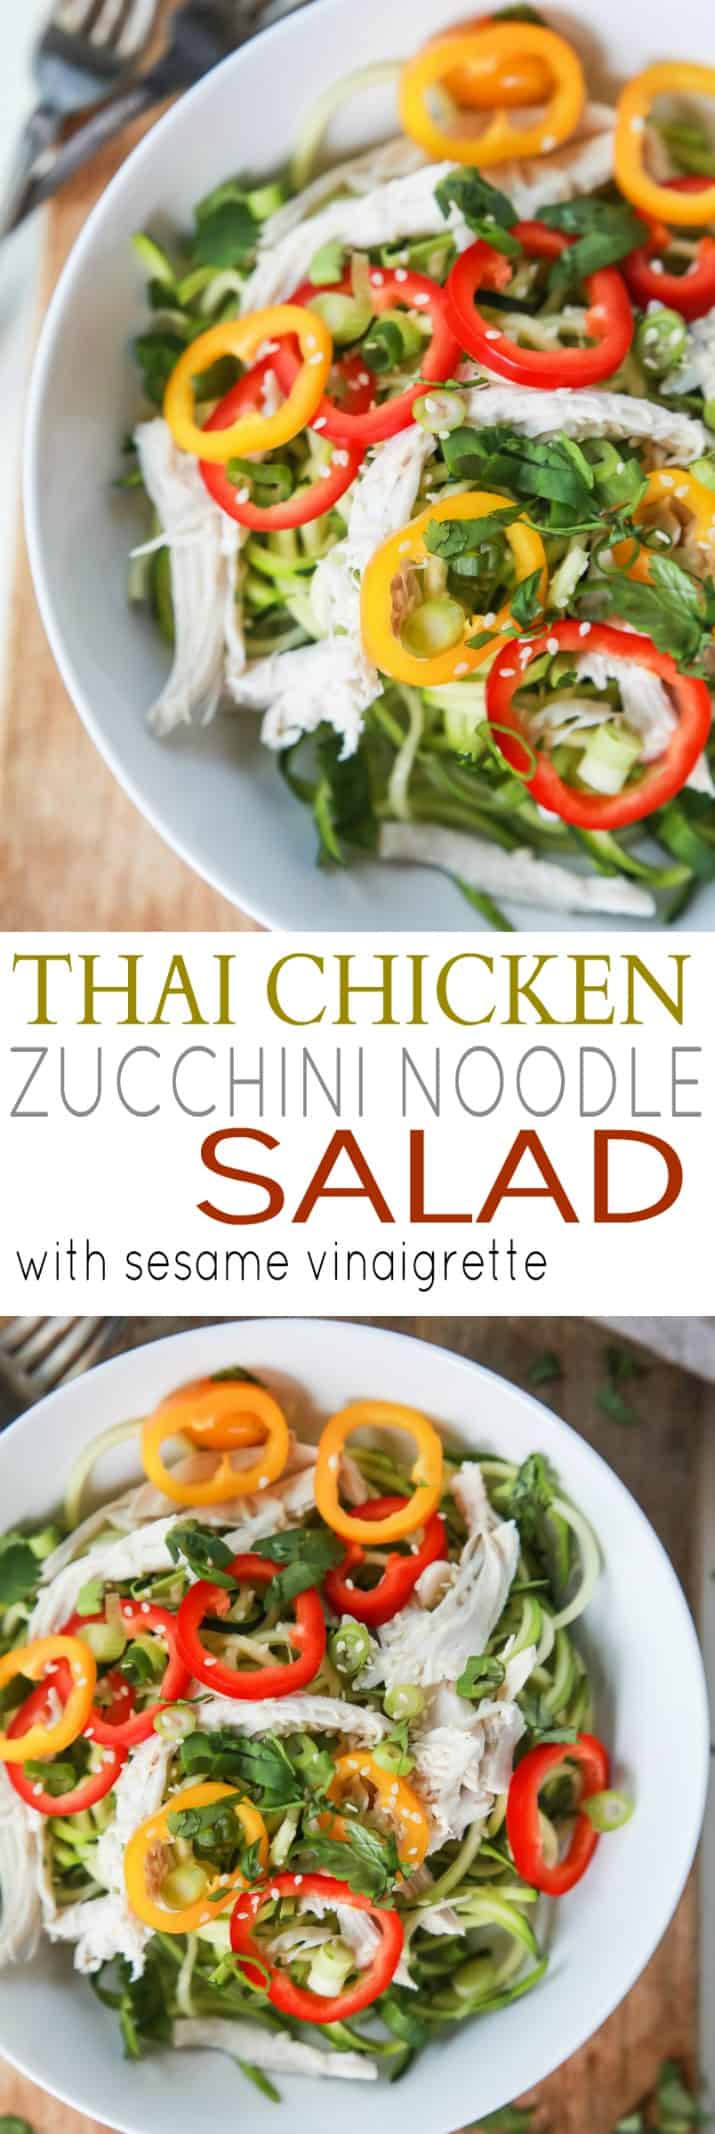 Thai Chicken Zucchini Noodle Salad with a Sesame Vinaigrette done in 15 minutes and only 324 calories. This salad is served cold with raw zucchini noodles, it is refreshing, light, filled with bold flavors and perfect for the summer! | joyfulhealthyeats.com #glutenfree